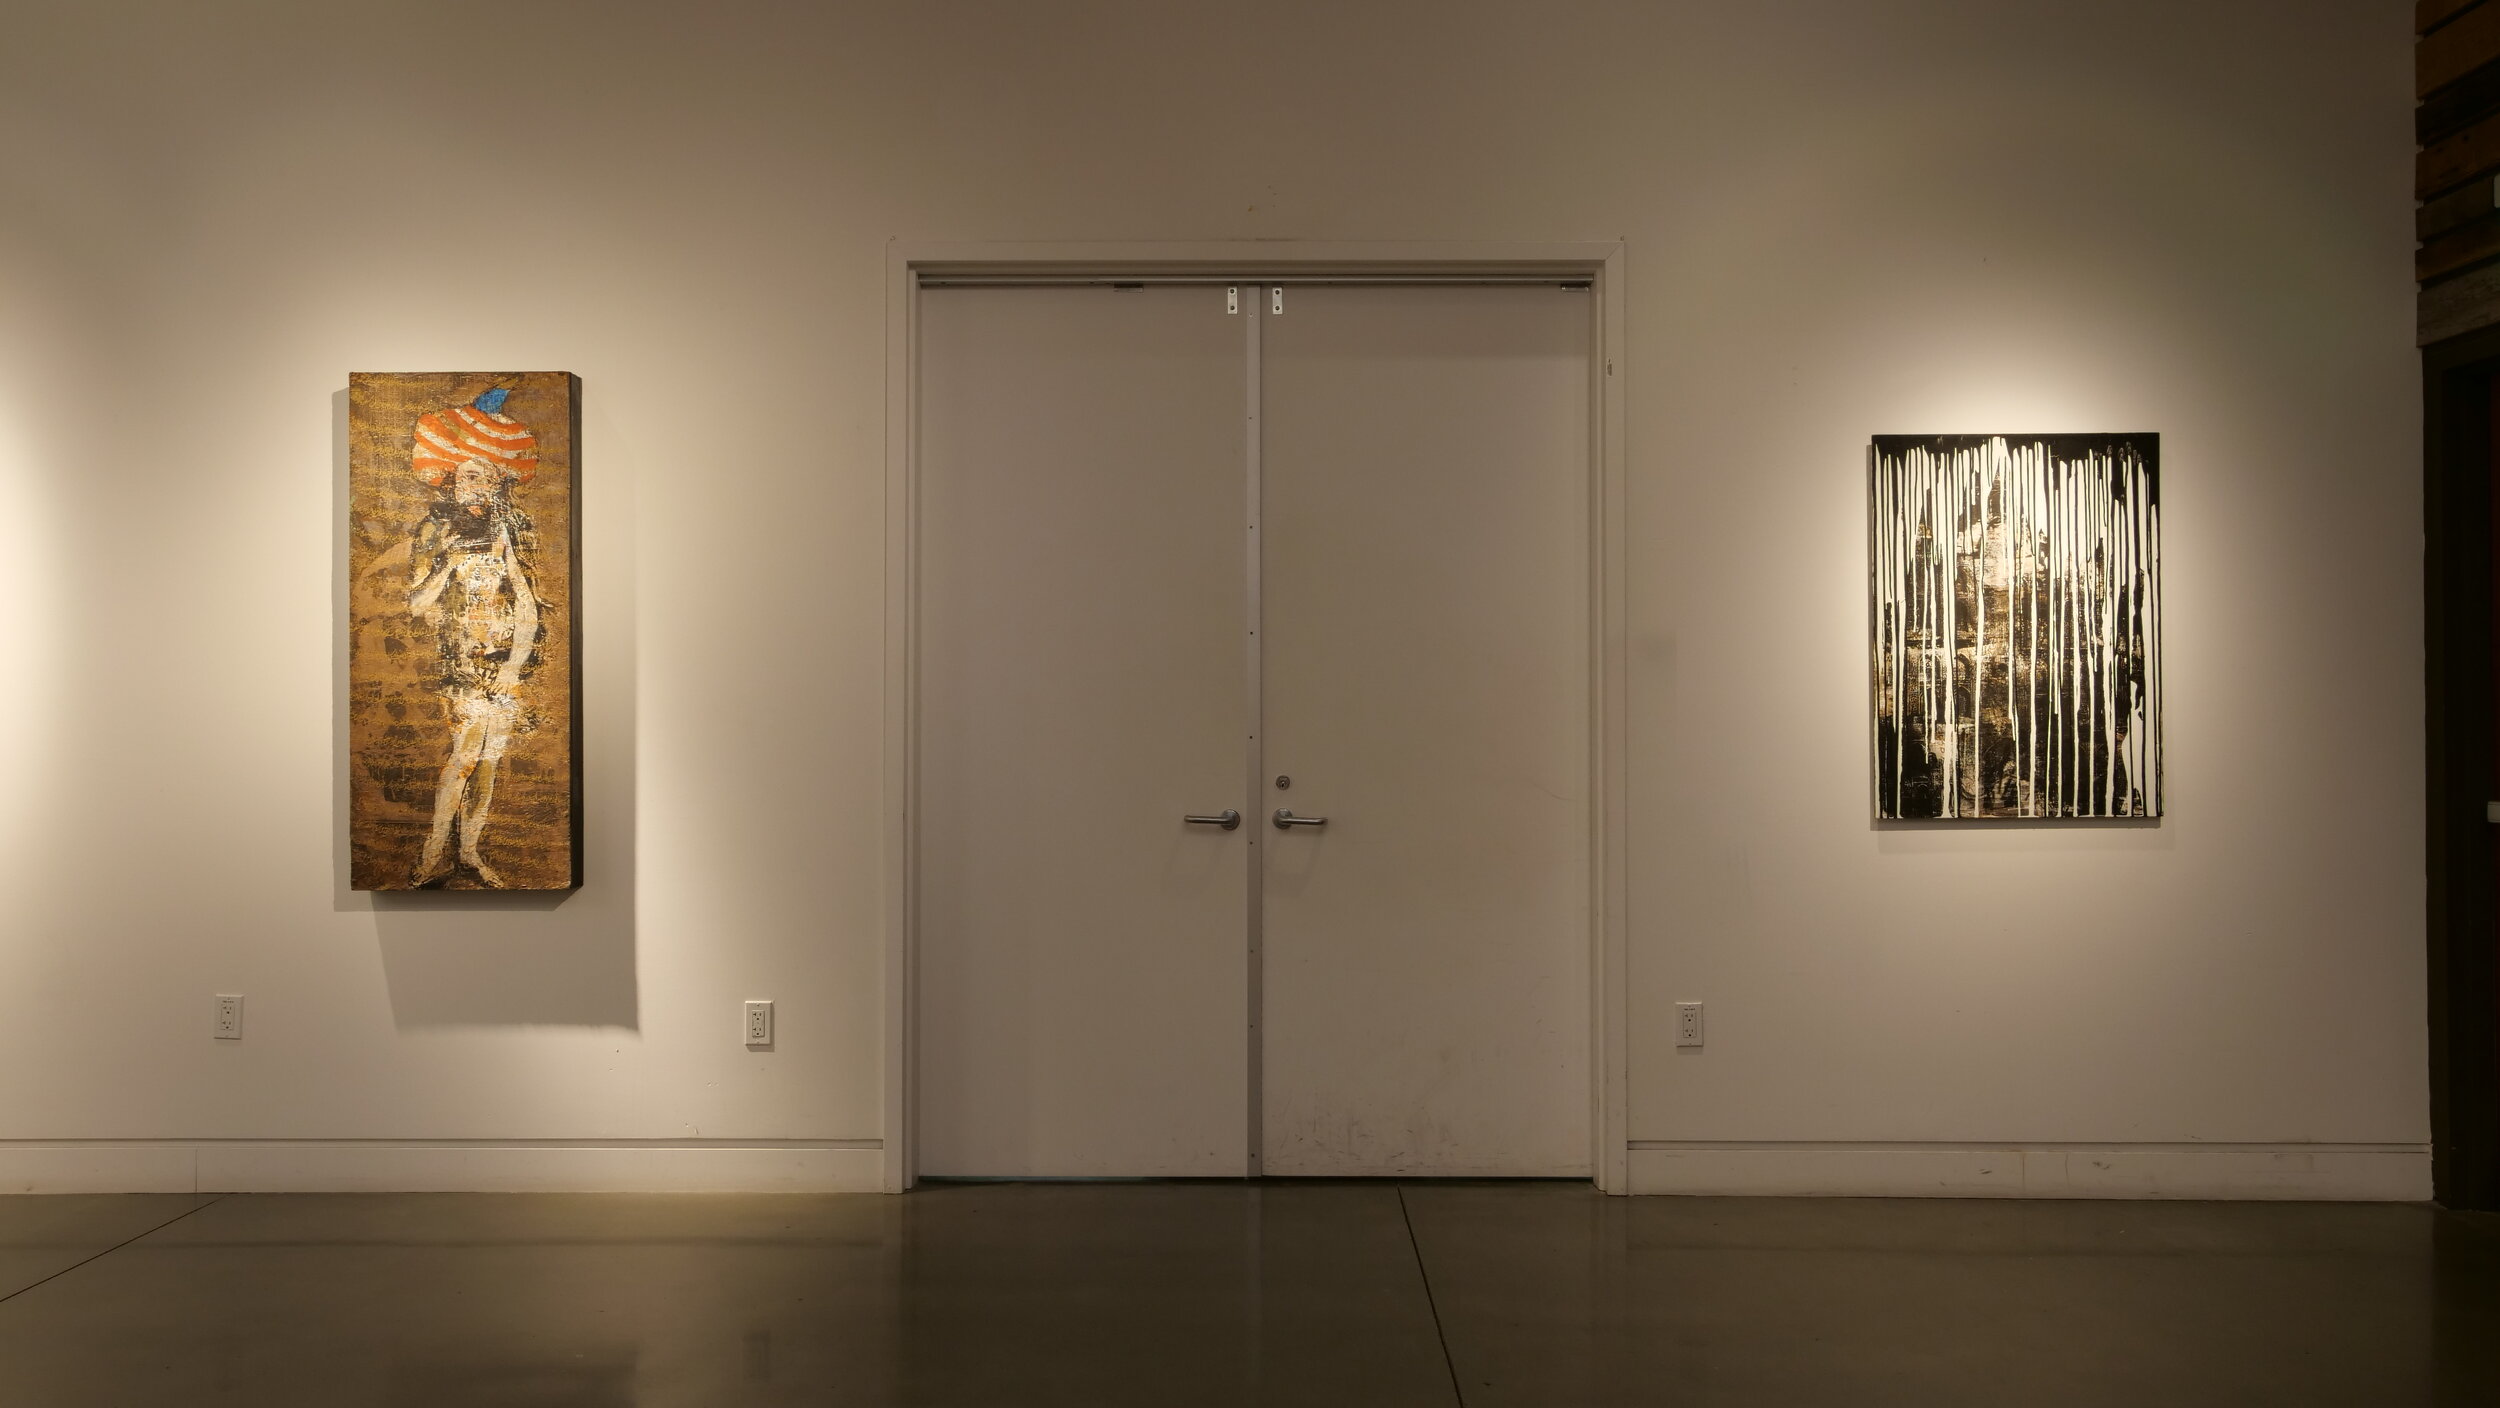 Moderately sized, warm-tone paintings hang on either side of double doors. (Copy)